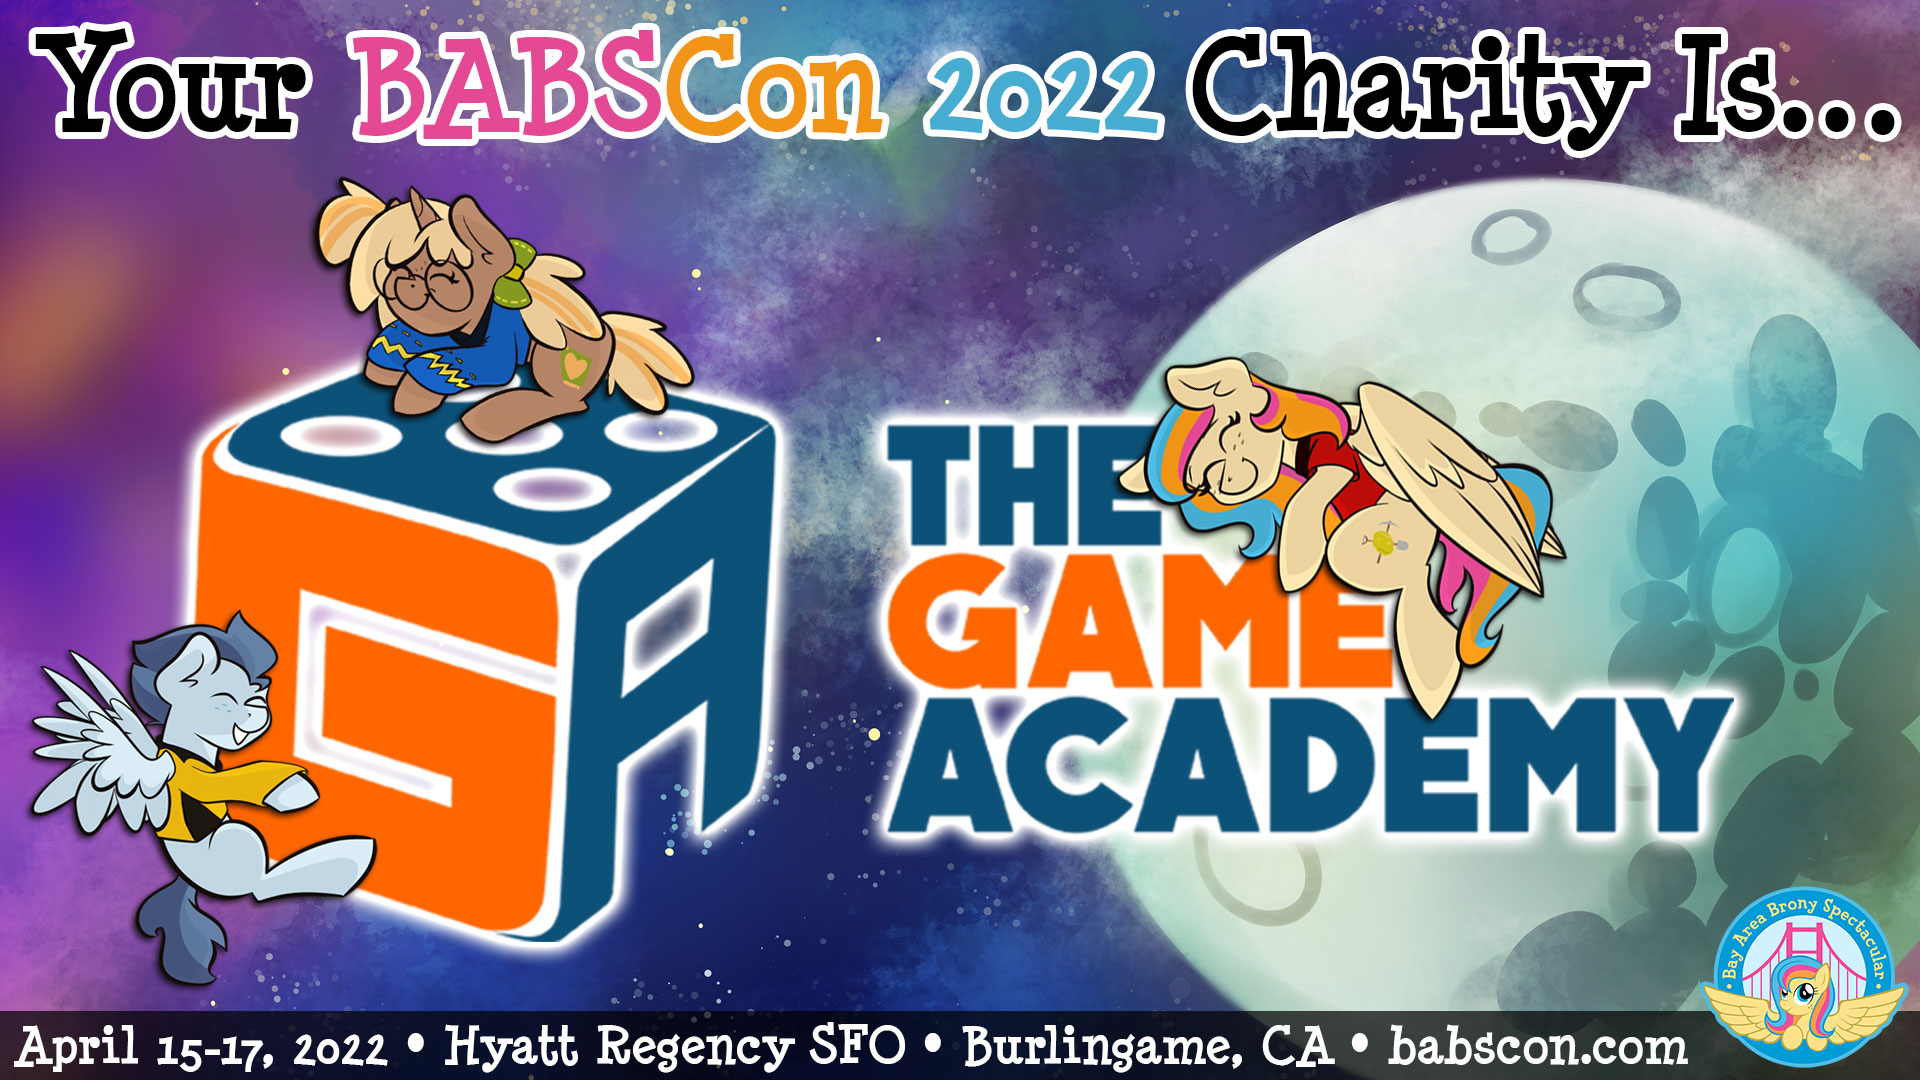 BABSCon's 2022 Charity: The Game Academy